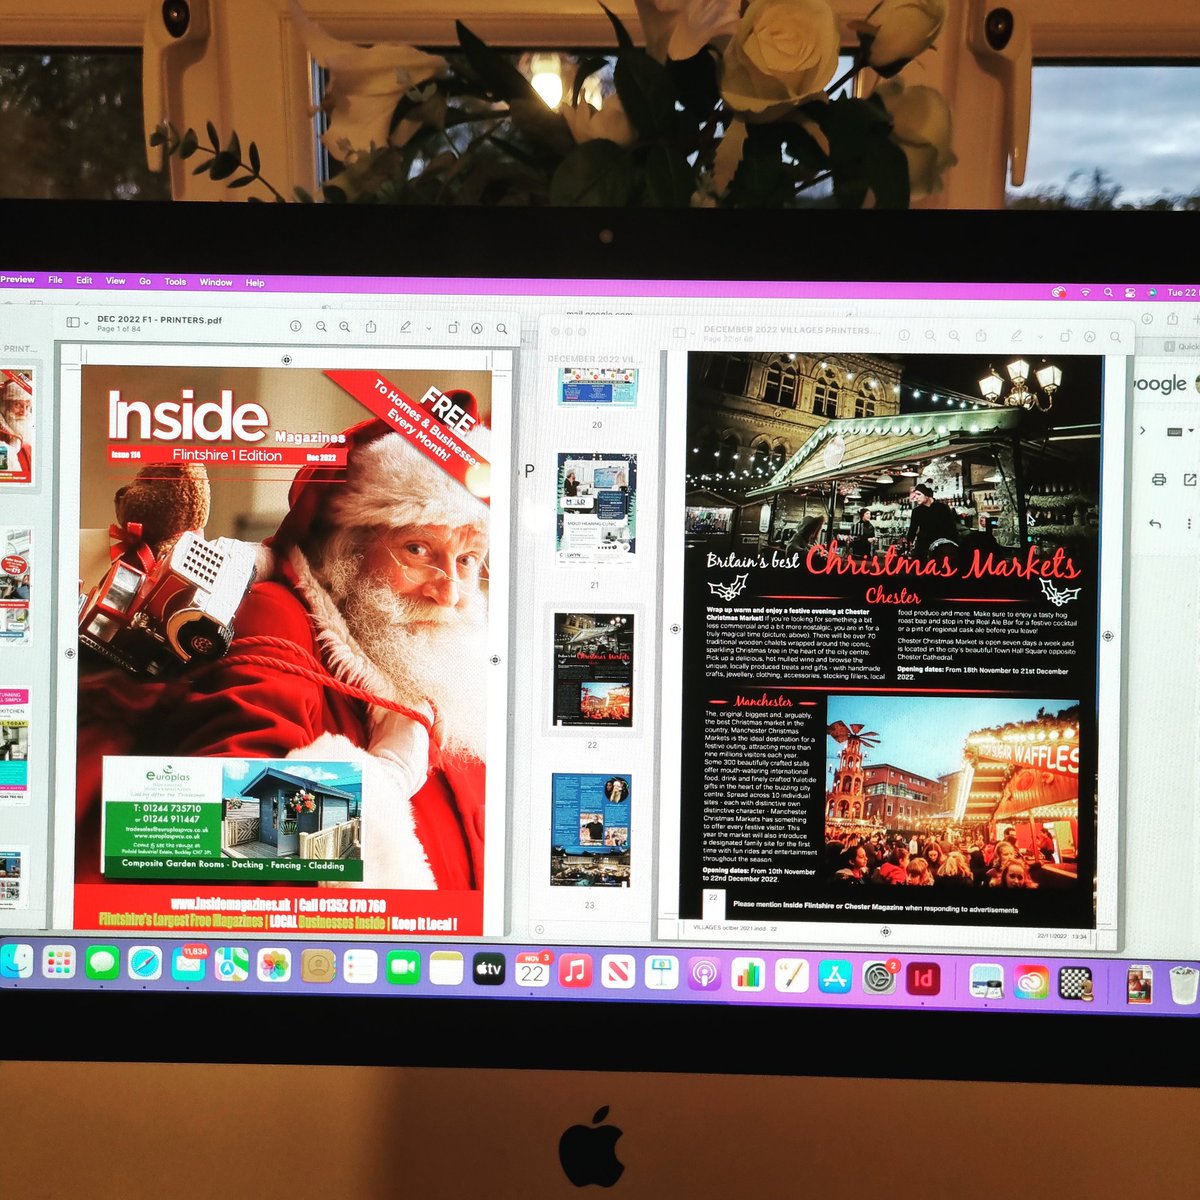 Our December Issues are out next week. #NorthWales #Cheshire #Chester #Wrexham #Flintshire #lovelocal